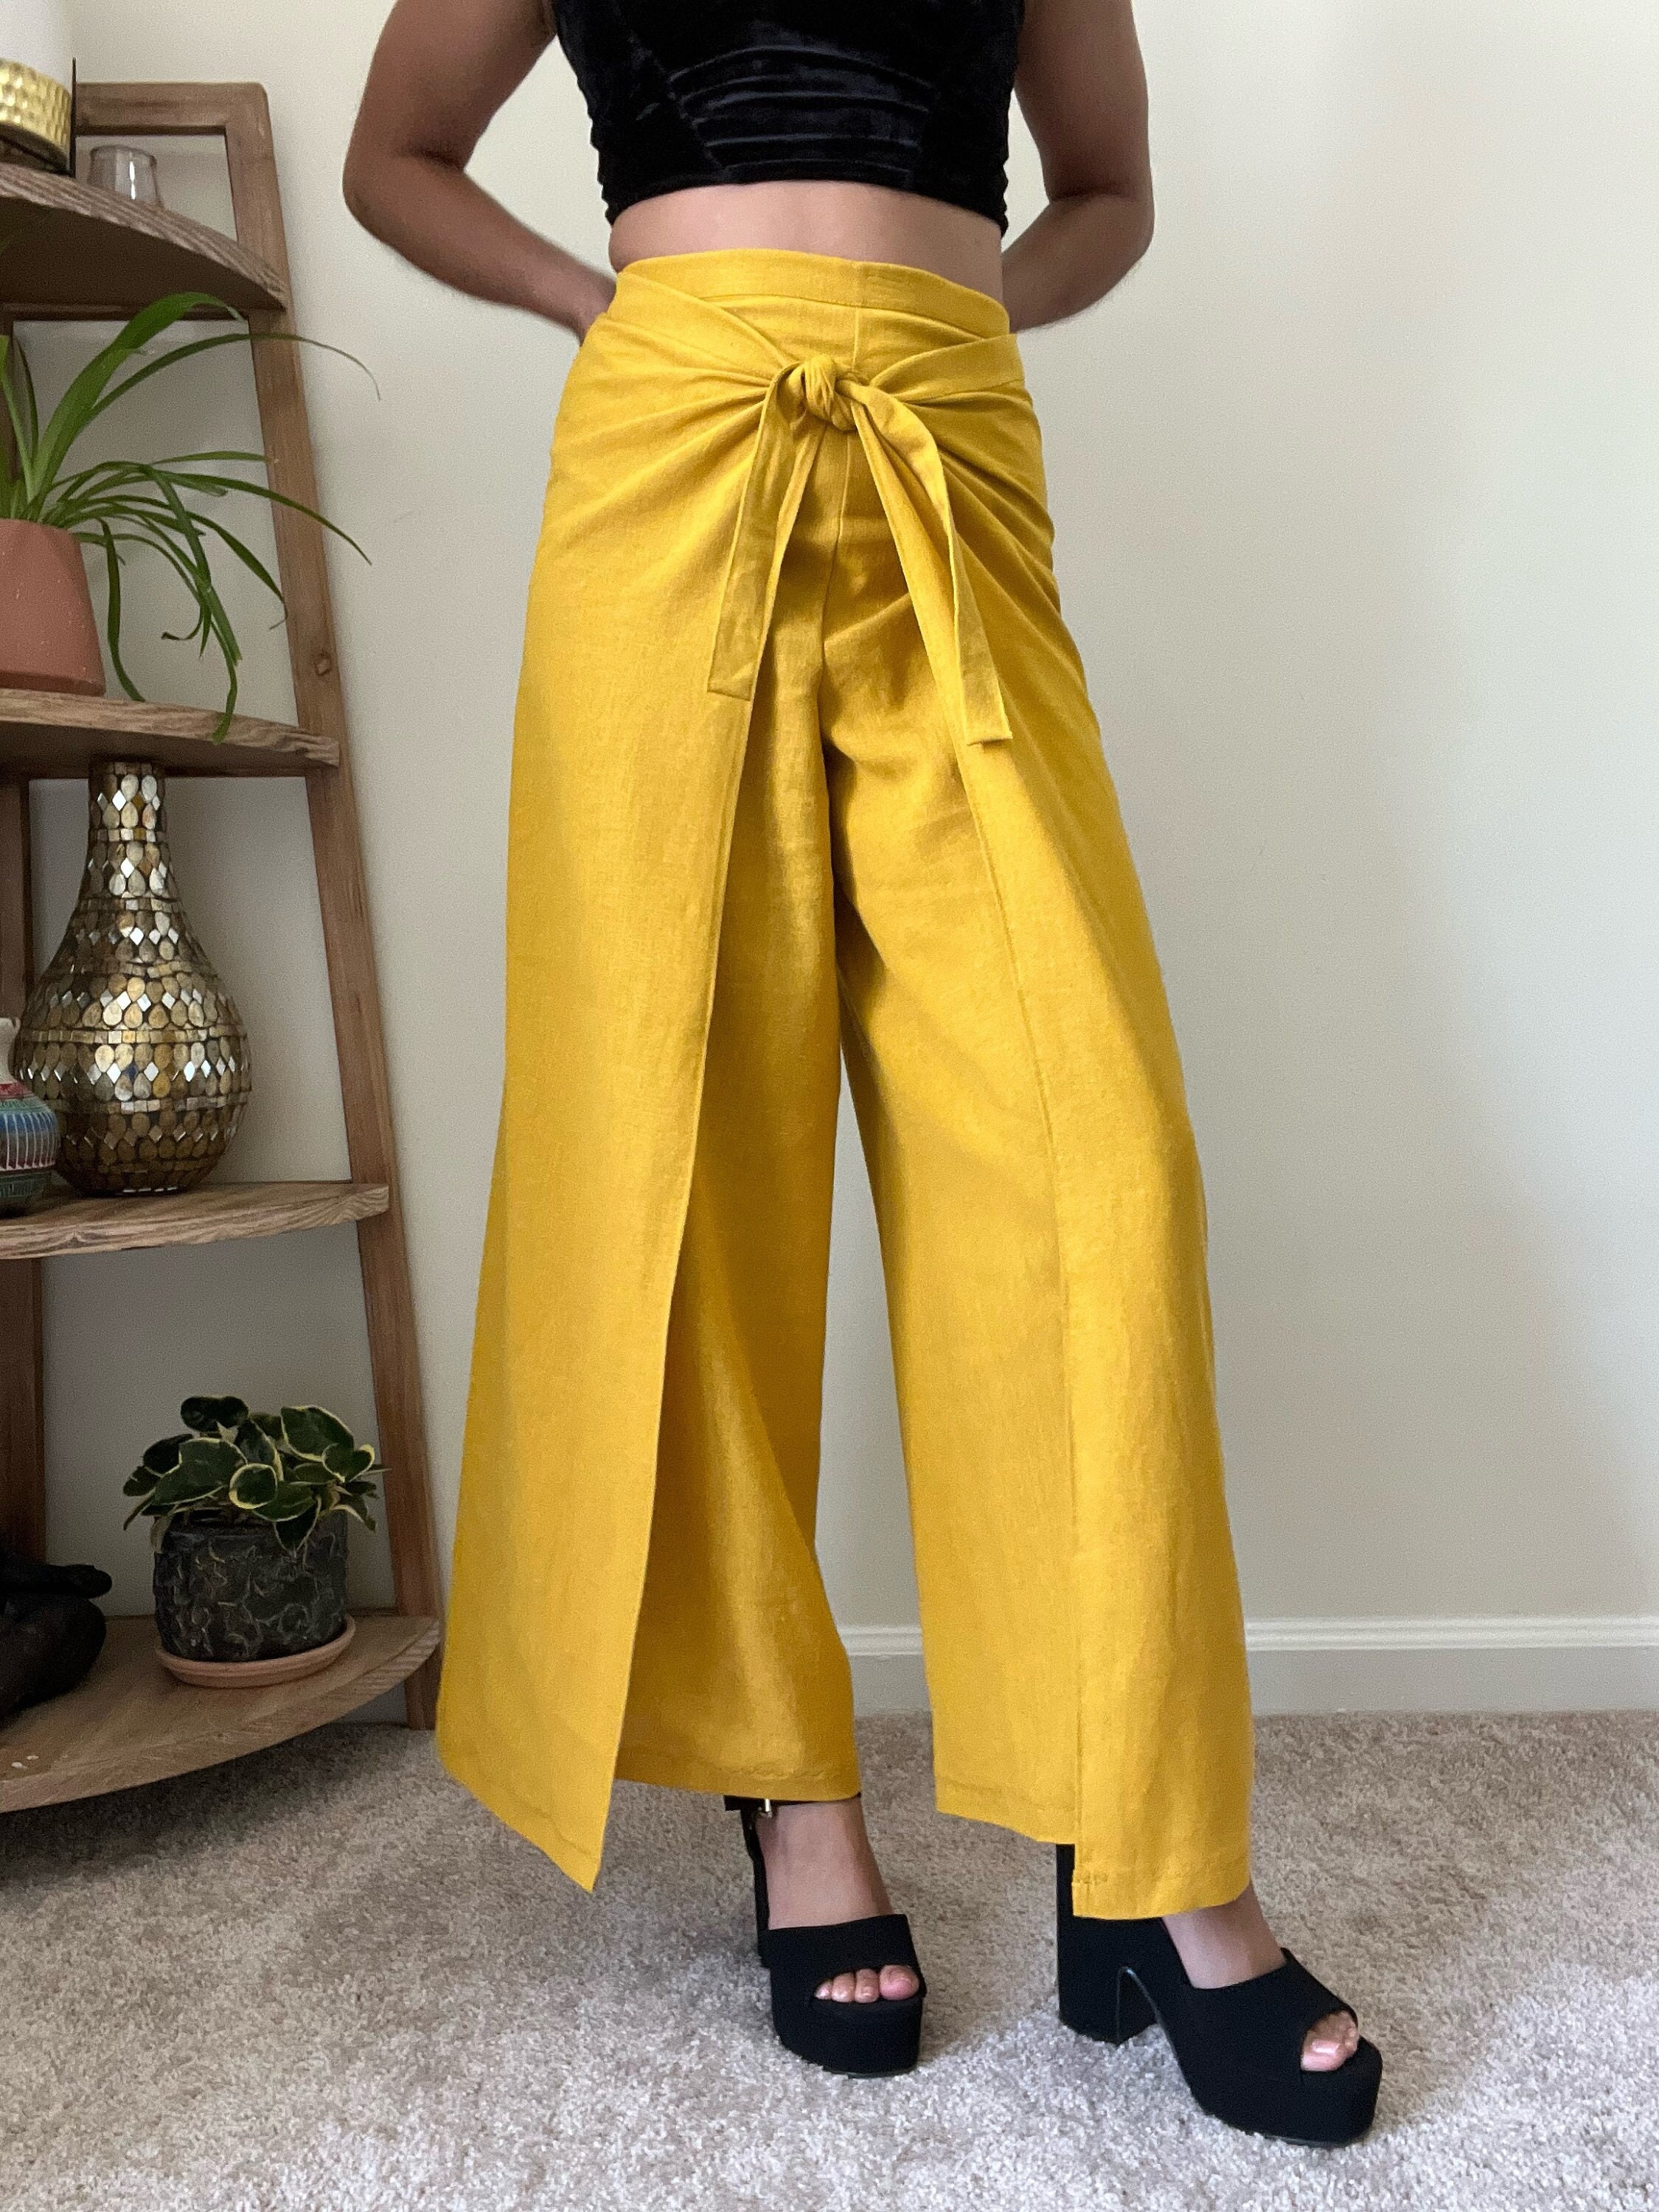 Black Linen Pants Outfit Summer Casual Street Styles, Women's Wide Leg  Linen Pants With Pockets, Long Linen Palazzo Pants 0873 -  Canada